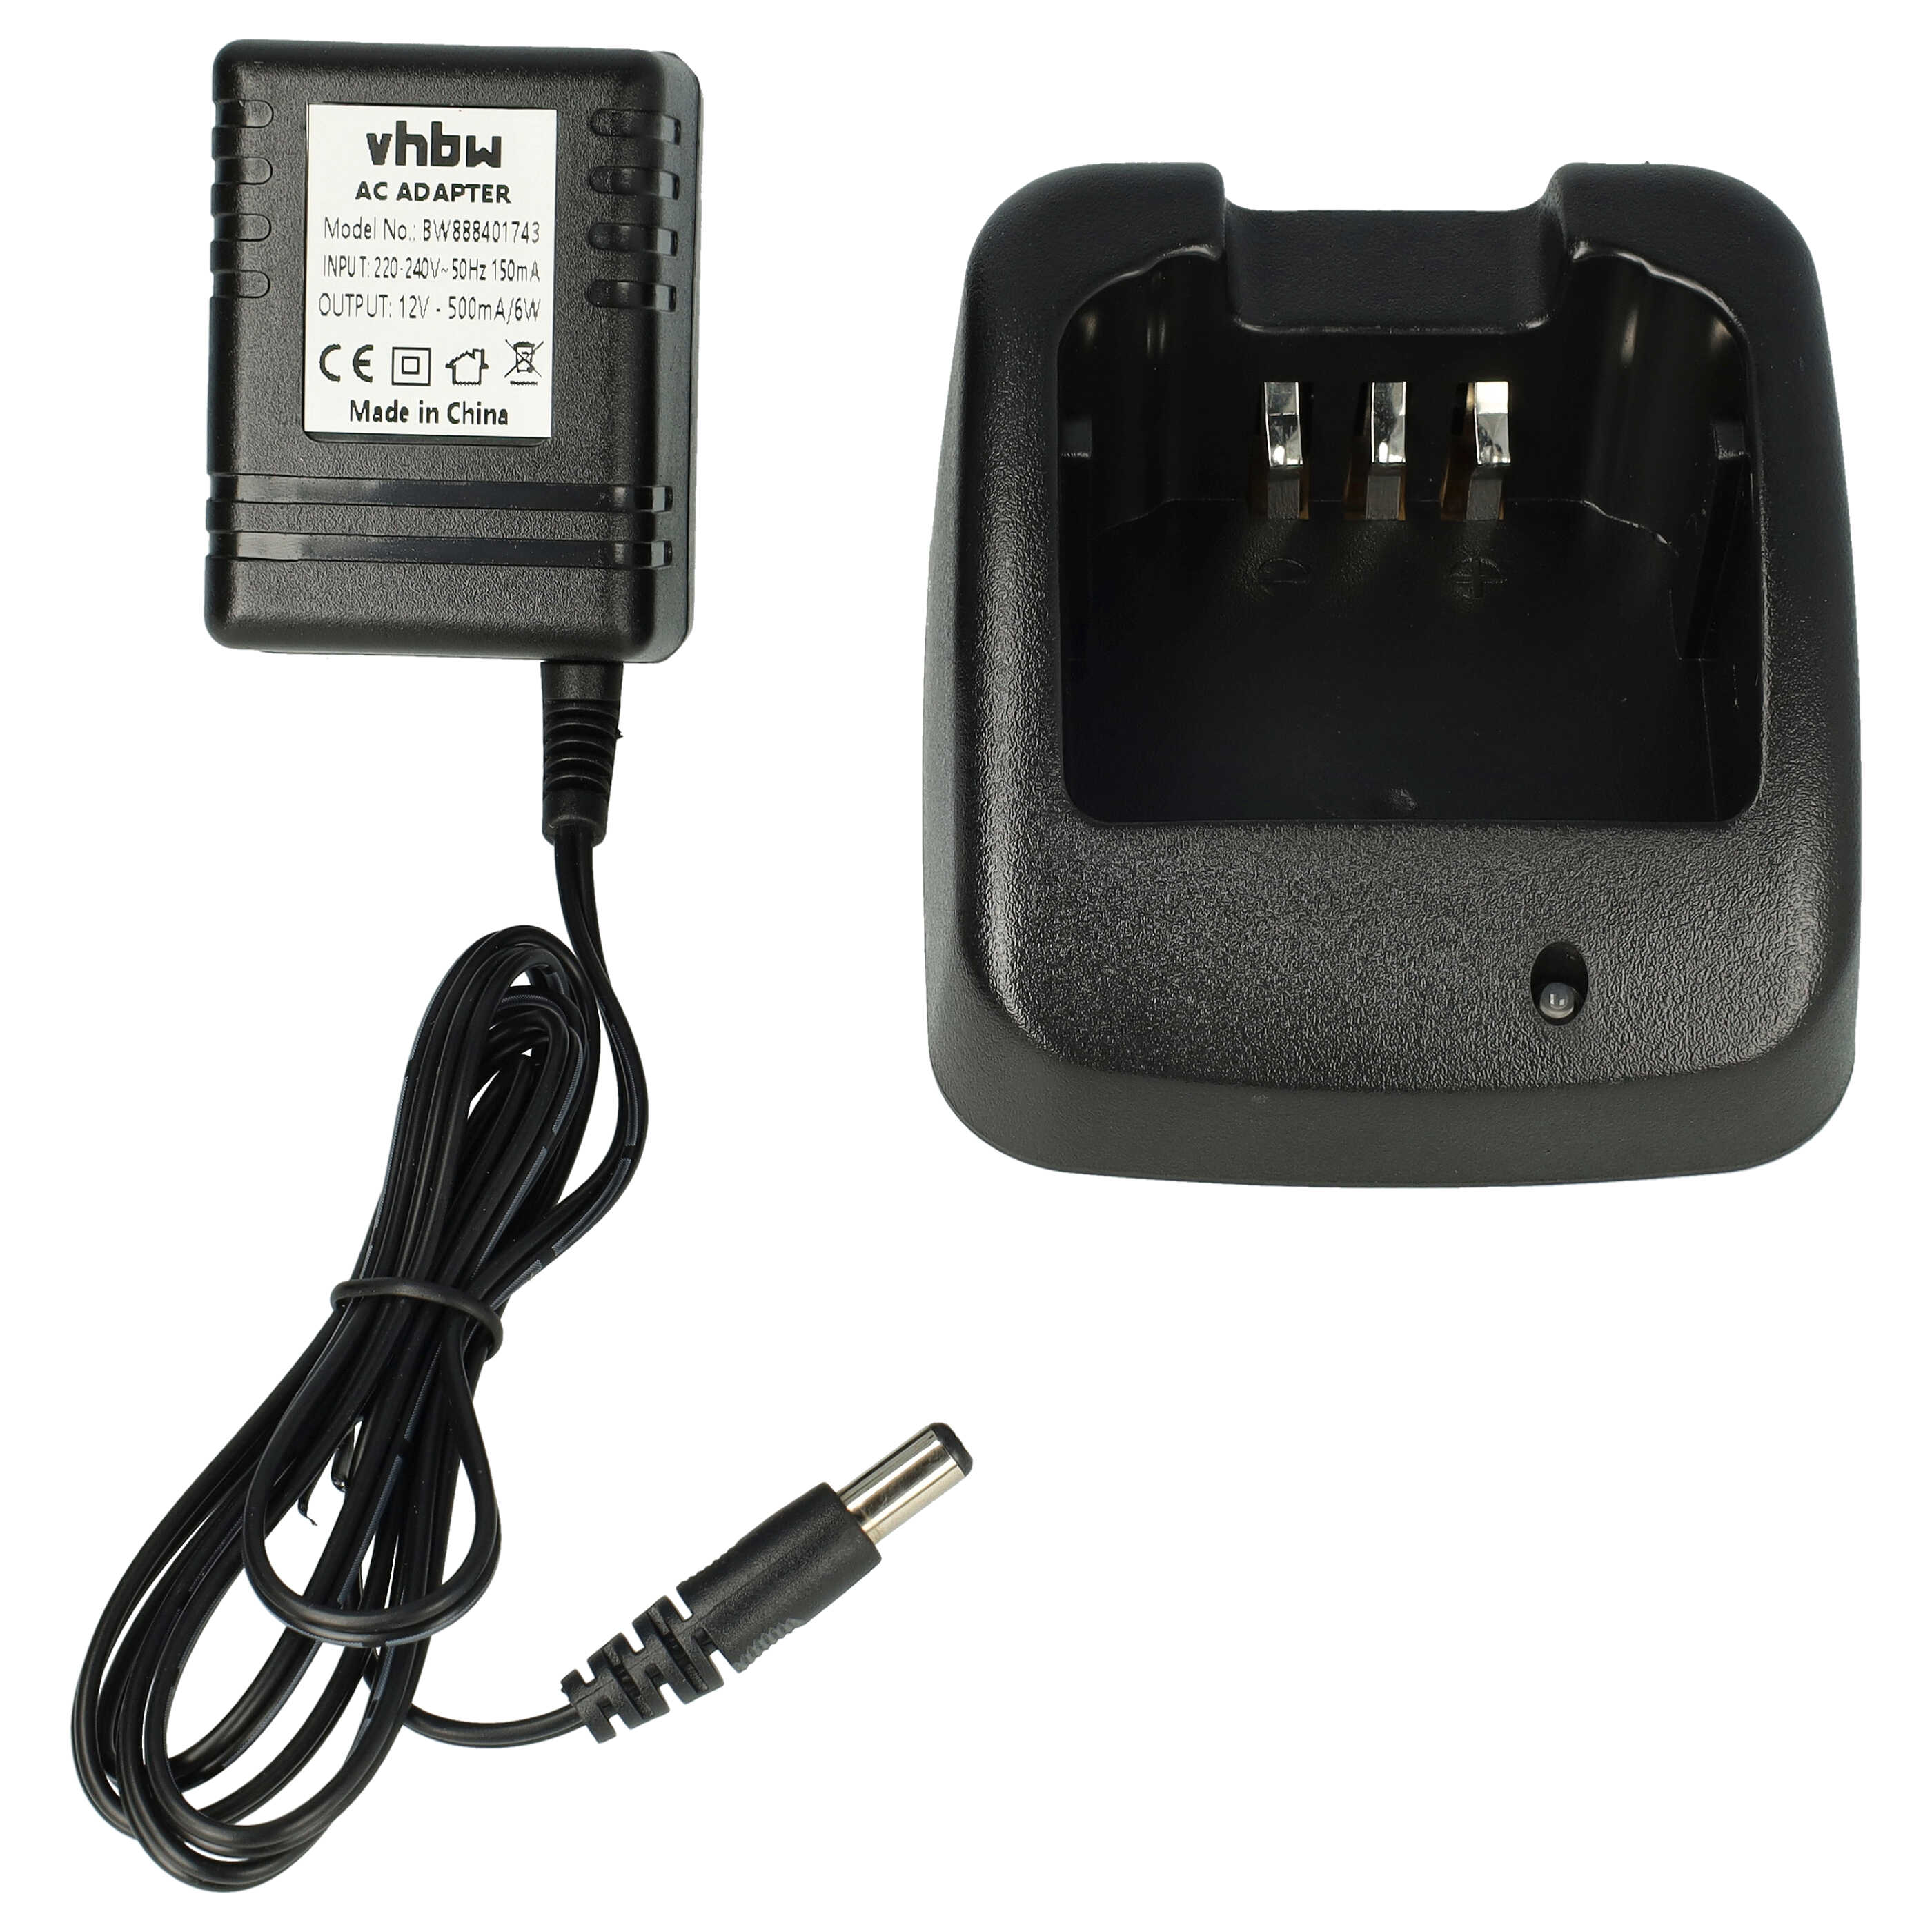 Charger Suitable for Icom IC-F3031S Radio Batteries - 12 V, 0.5 A